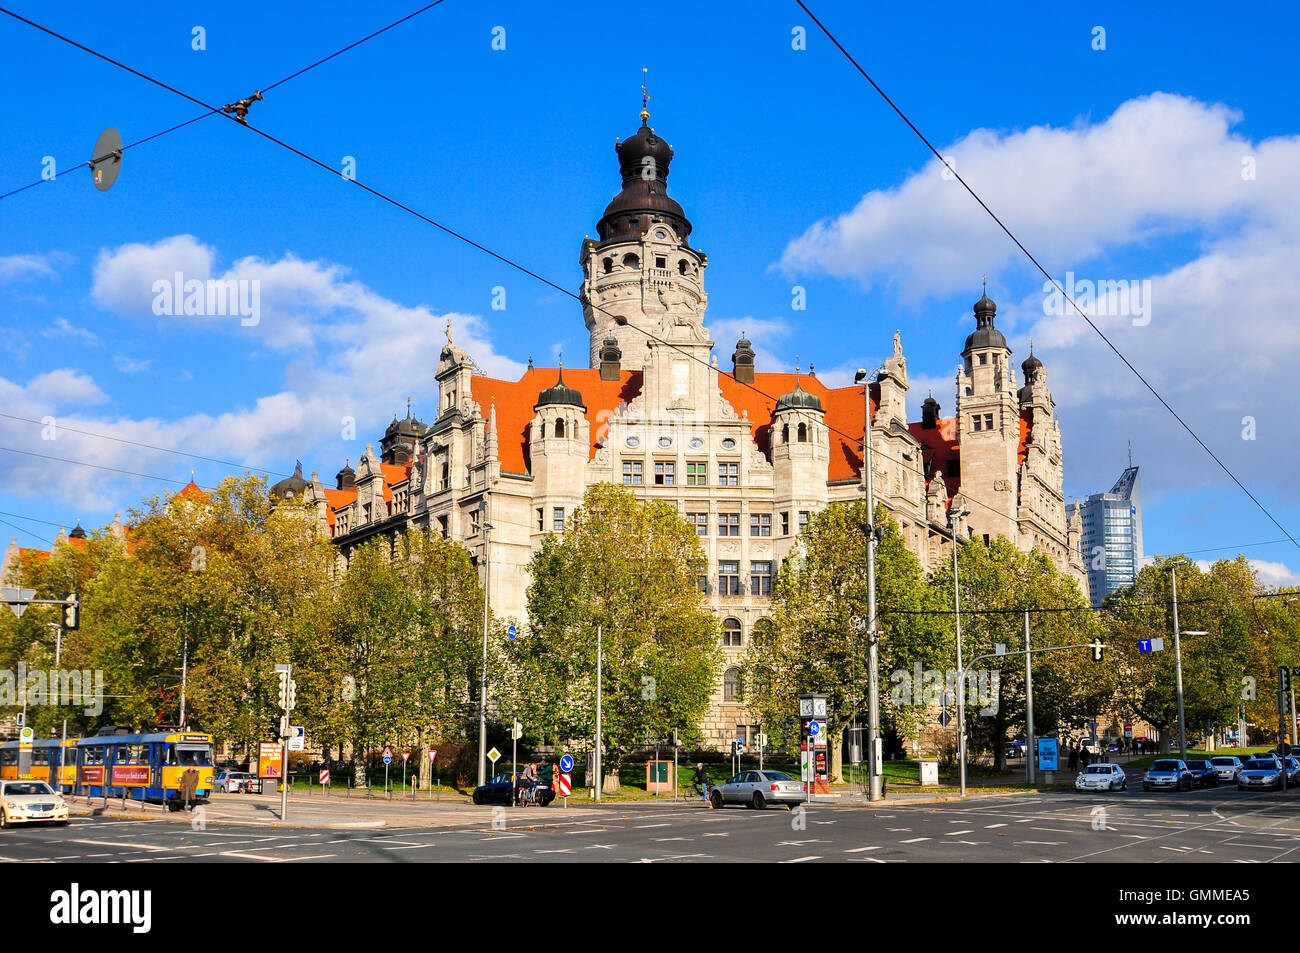 Neues Rathaus (new town hall) in Leipzig, Germany. Stock Photo